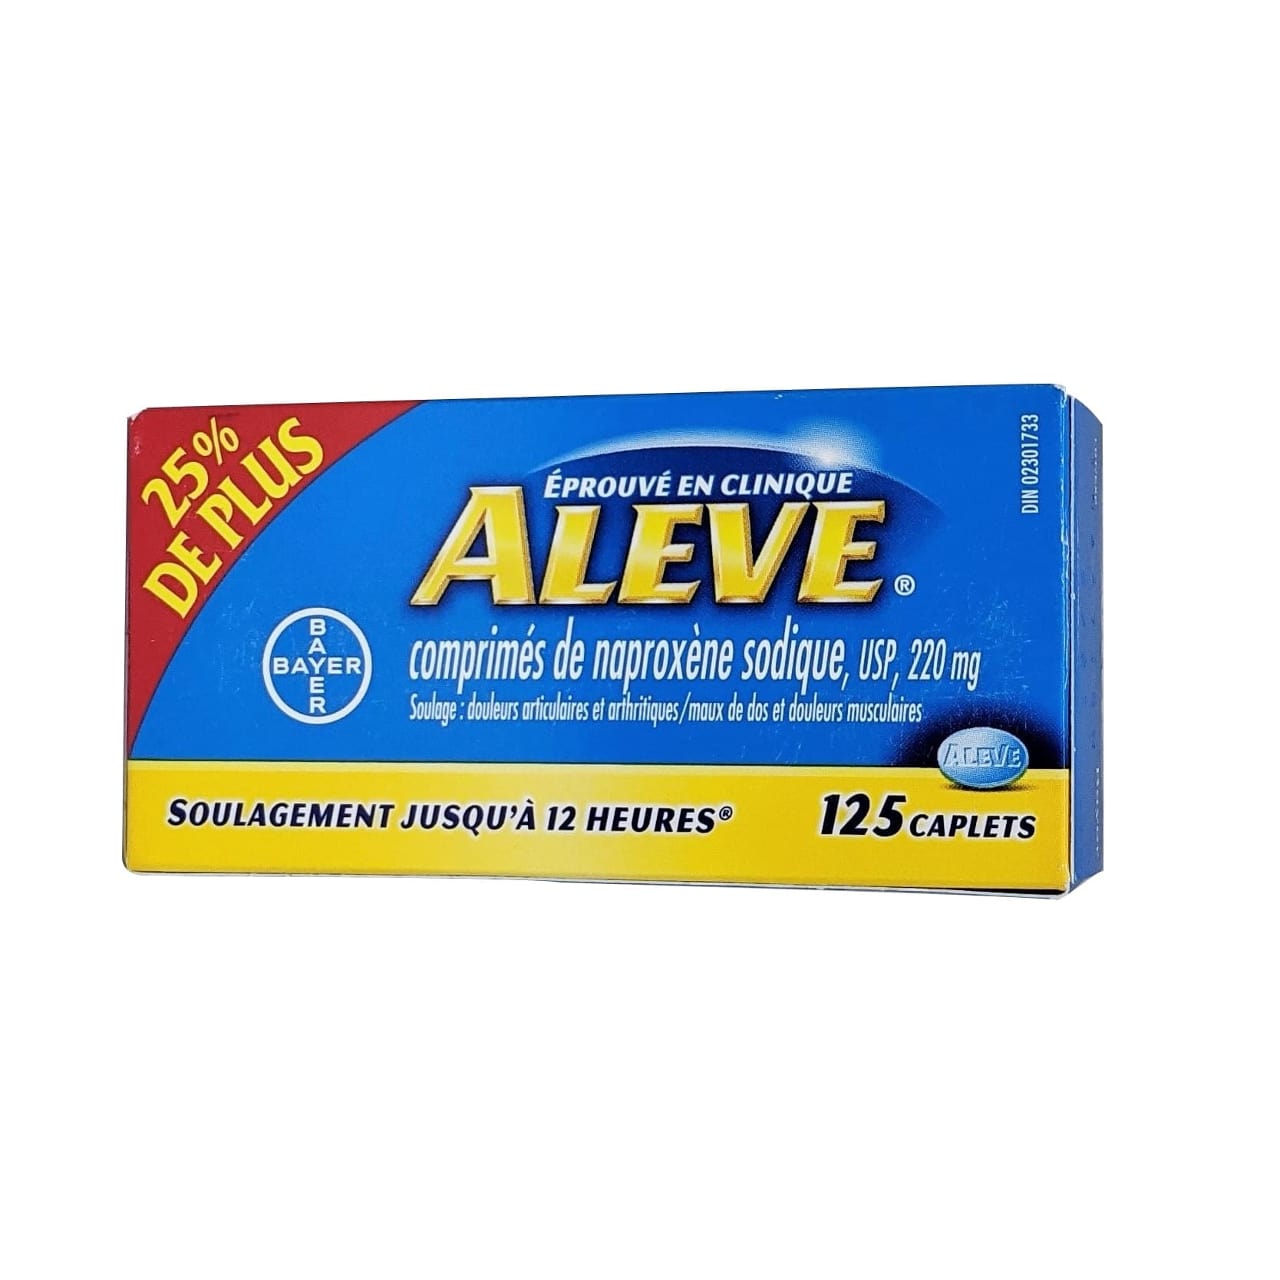 French product label for Aleve Naproxen Sodium 220mg 125 caplets